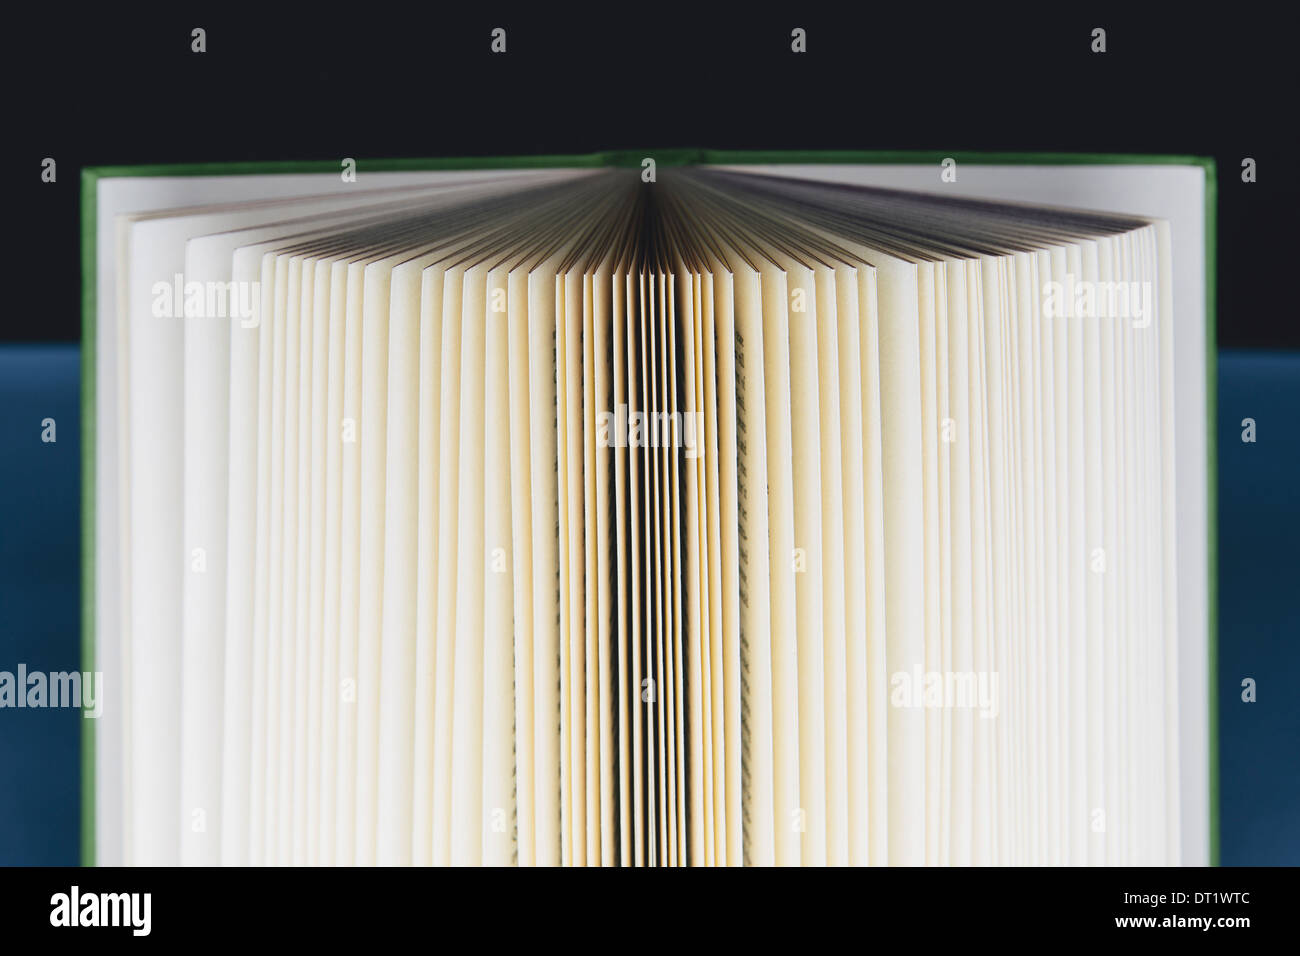 A hard cover printed book opened Pages fanned out with graduated yellowing edges changing to brown and black in the centre Stock Photo